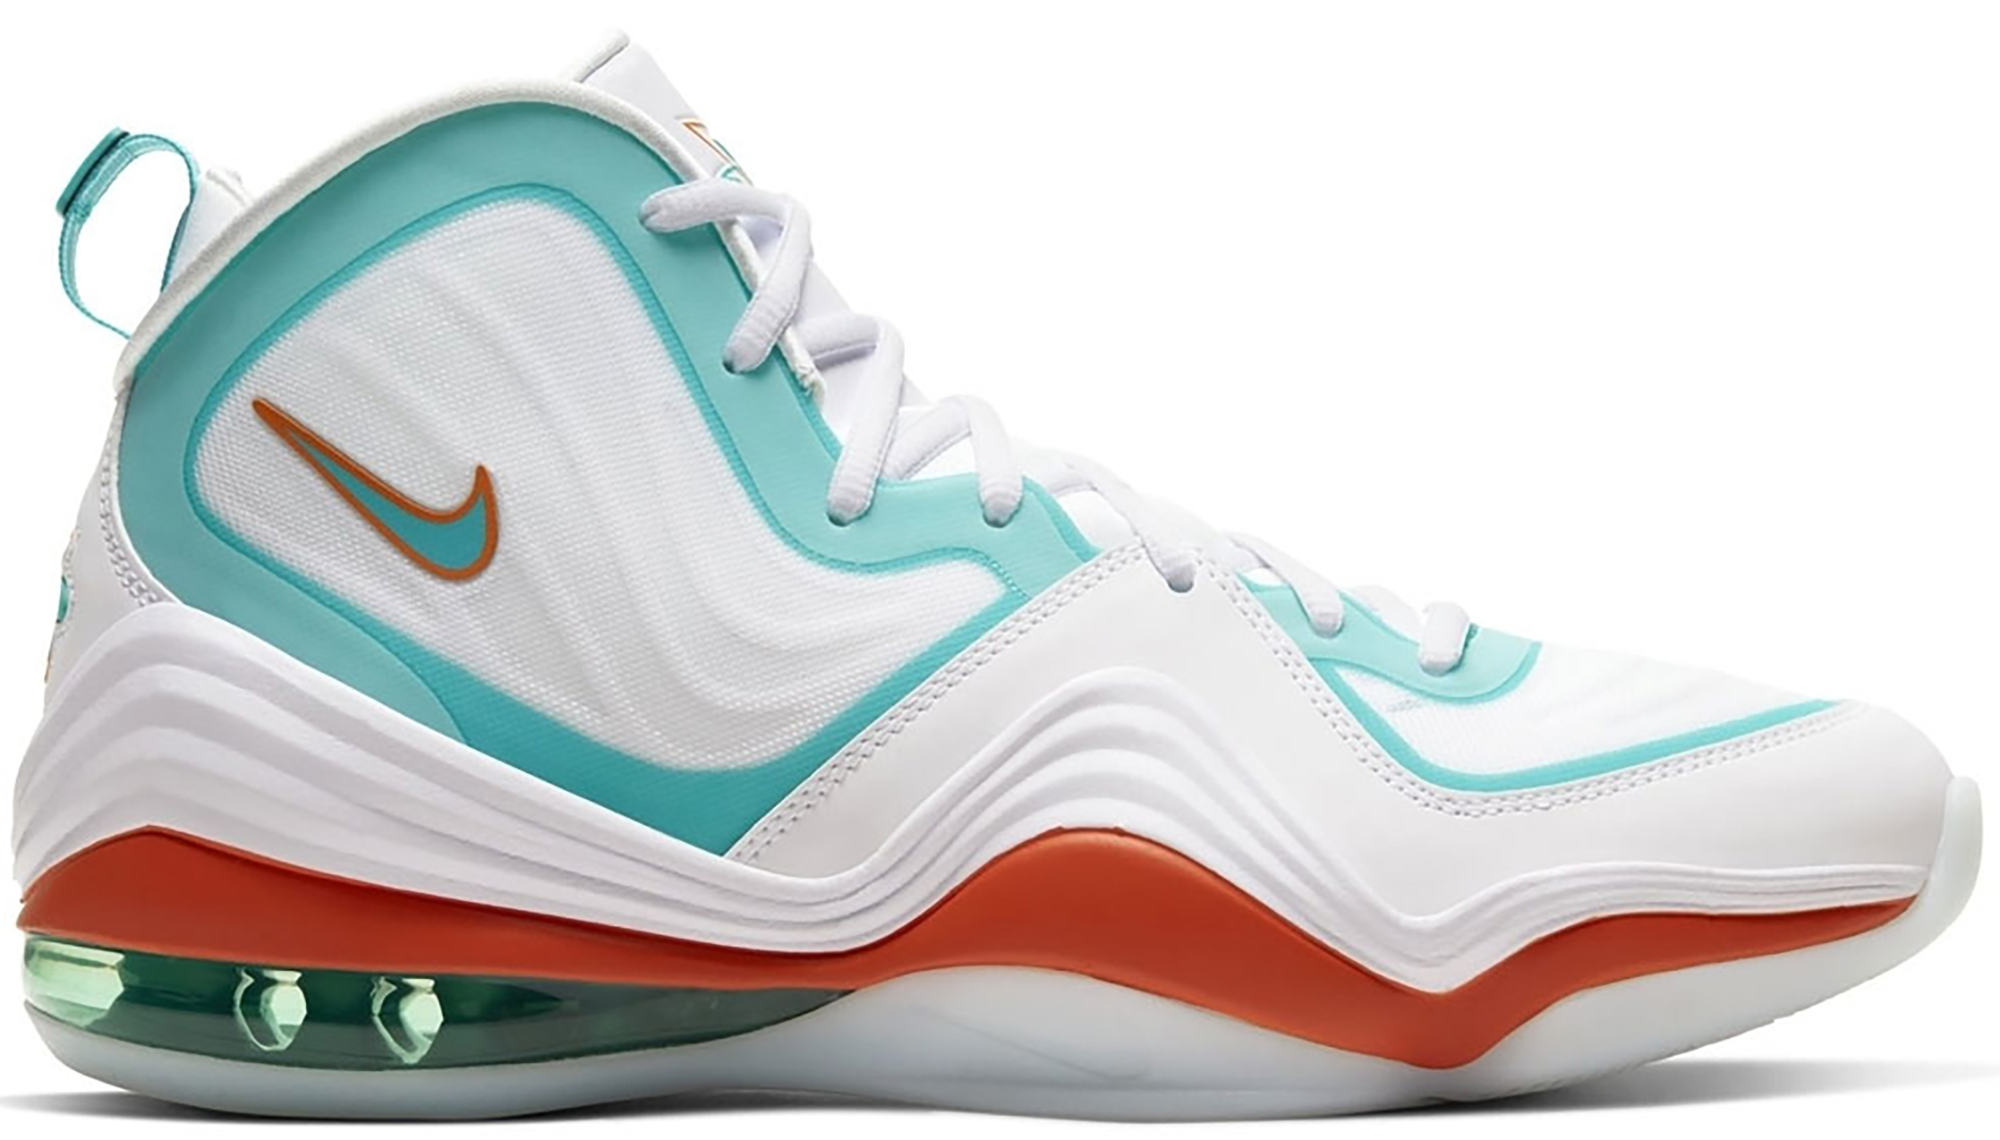 Nike Air Penny 5 Dolphins (2020 